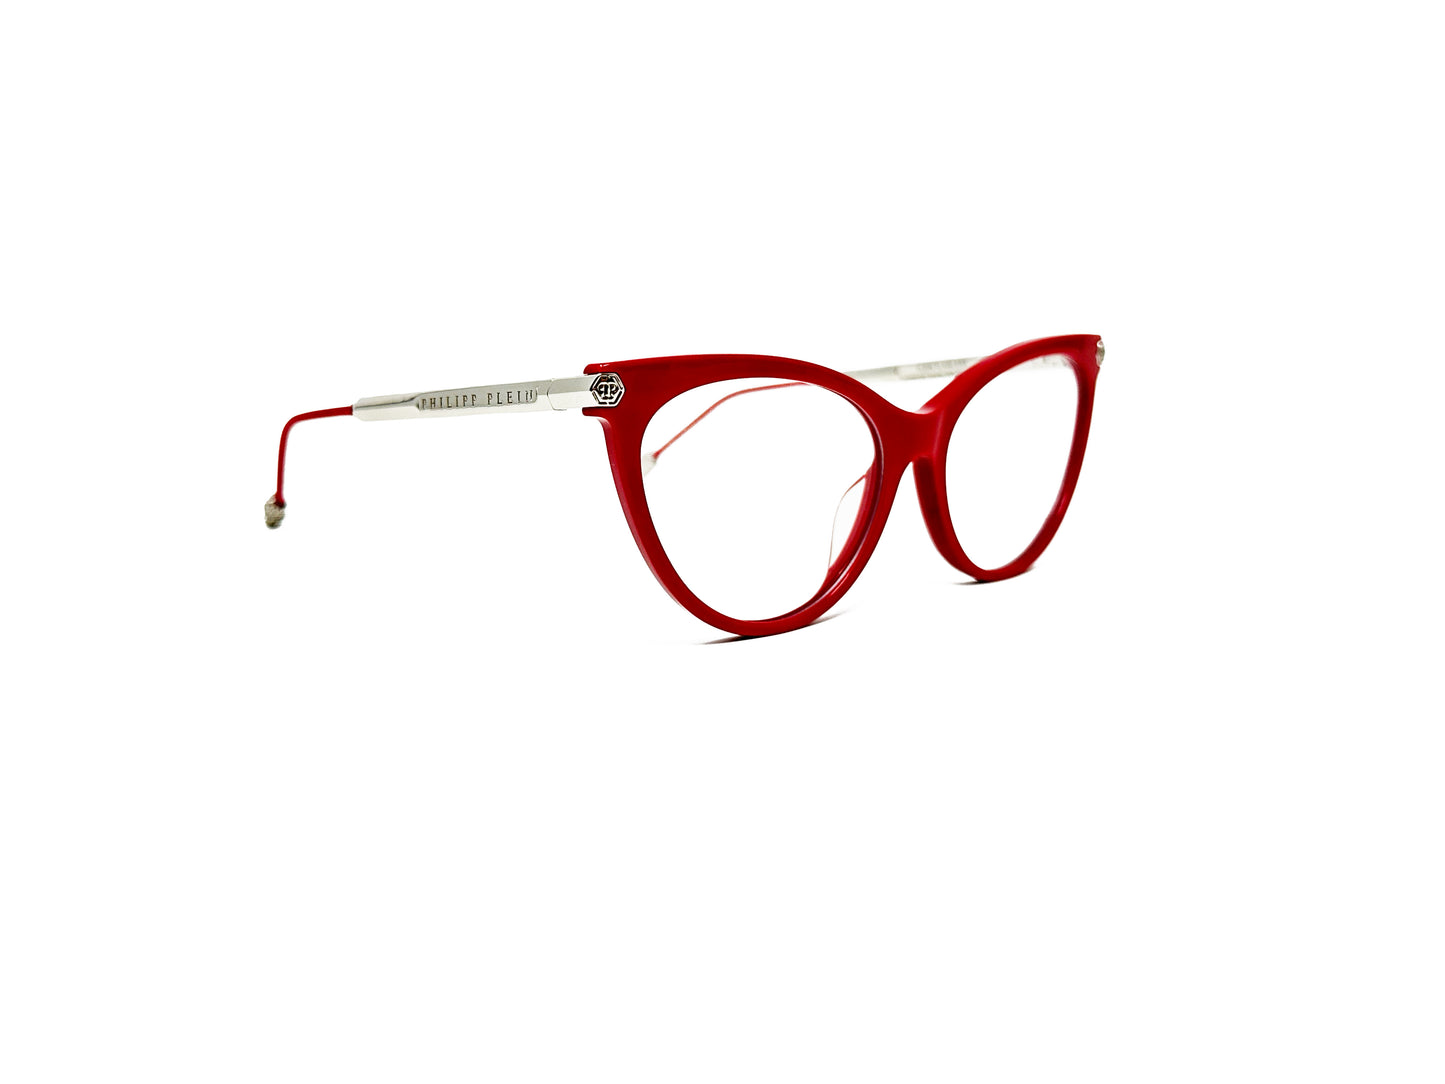 Philipp Plein cat-eye optical frame. Model: VPP037S Flawless. Color: 02GH Red with silver accents. Side view.